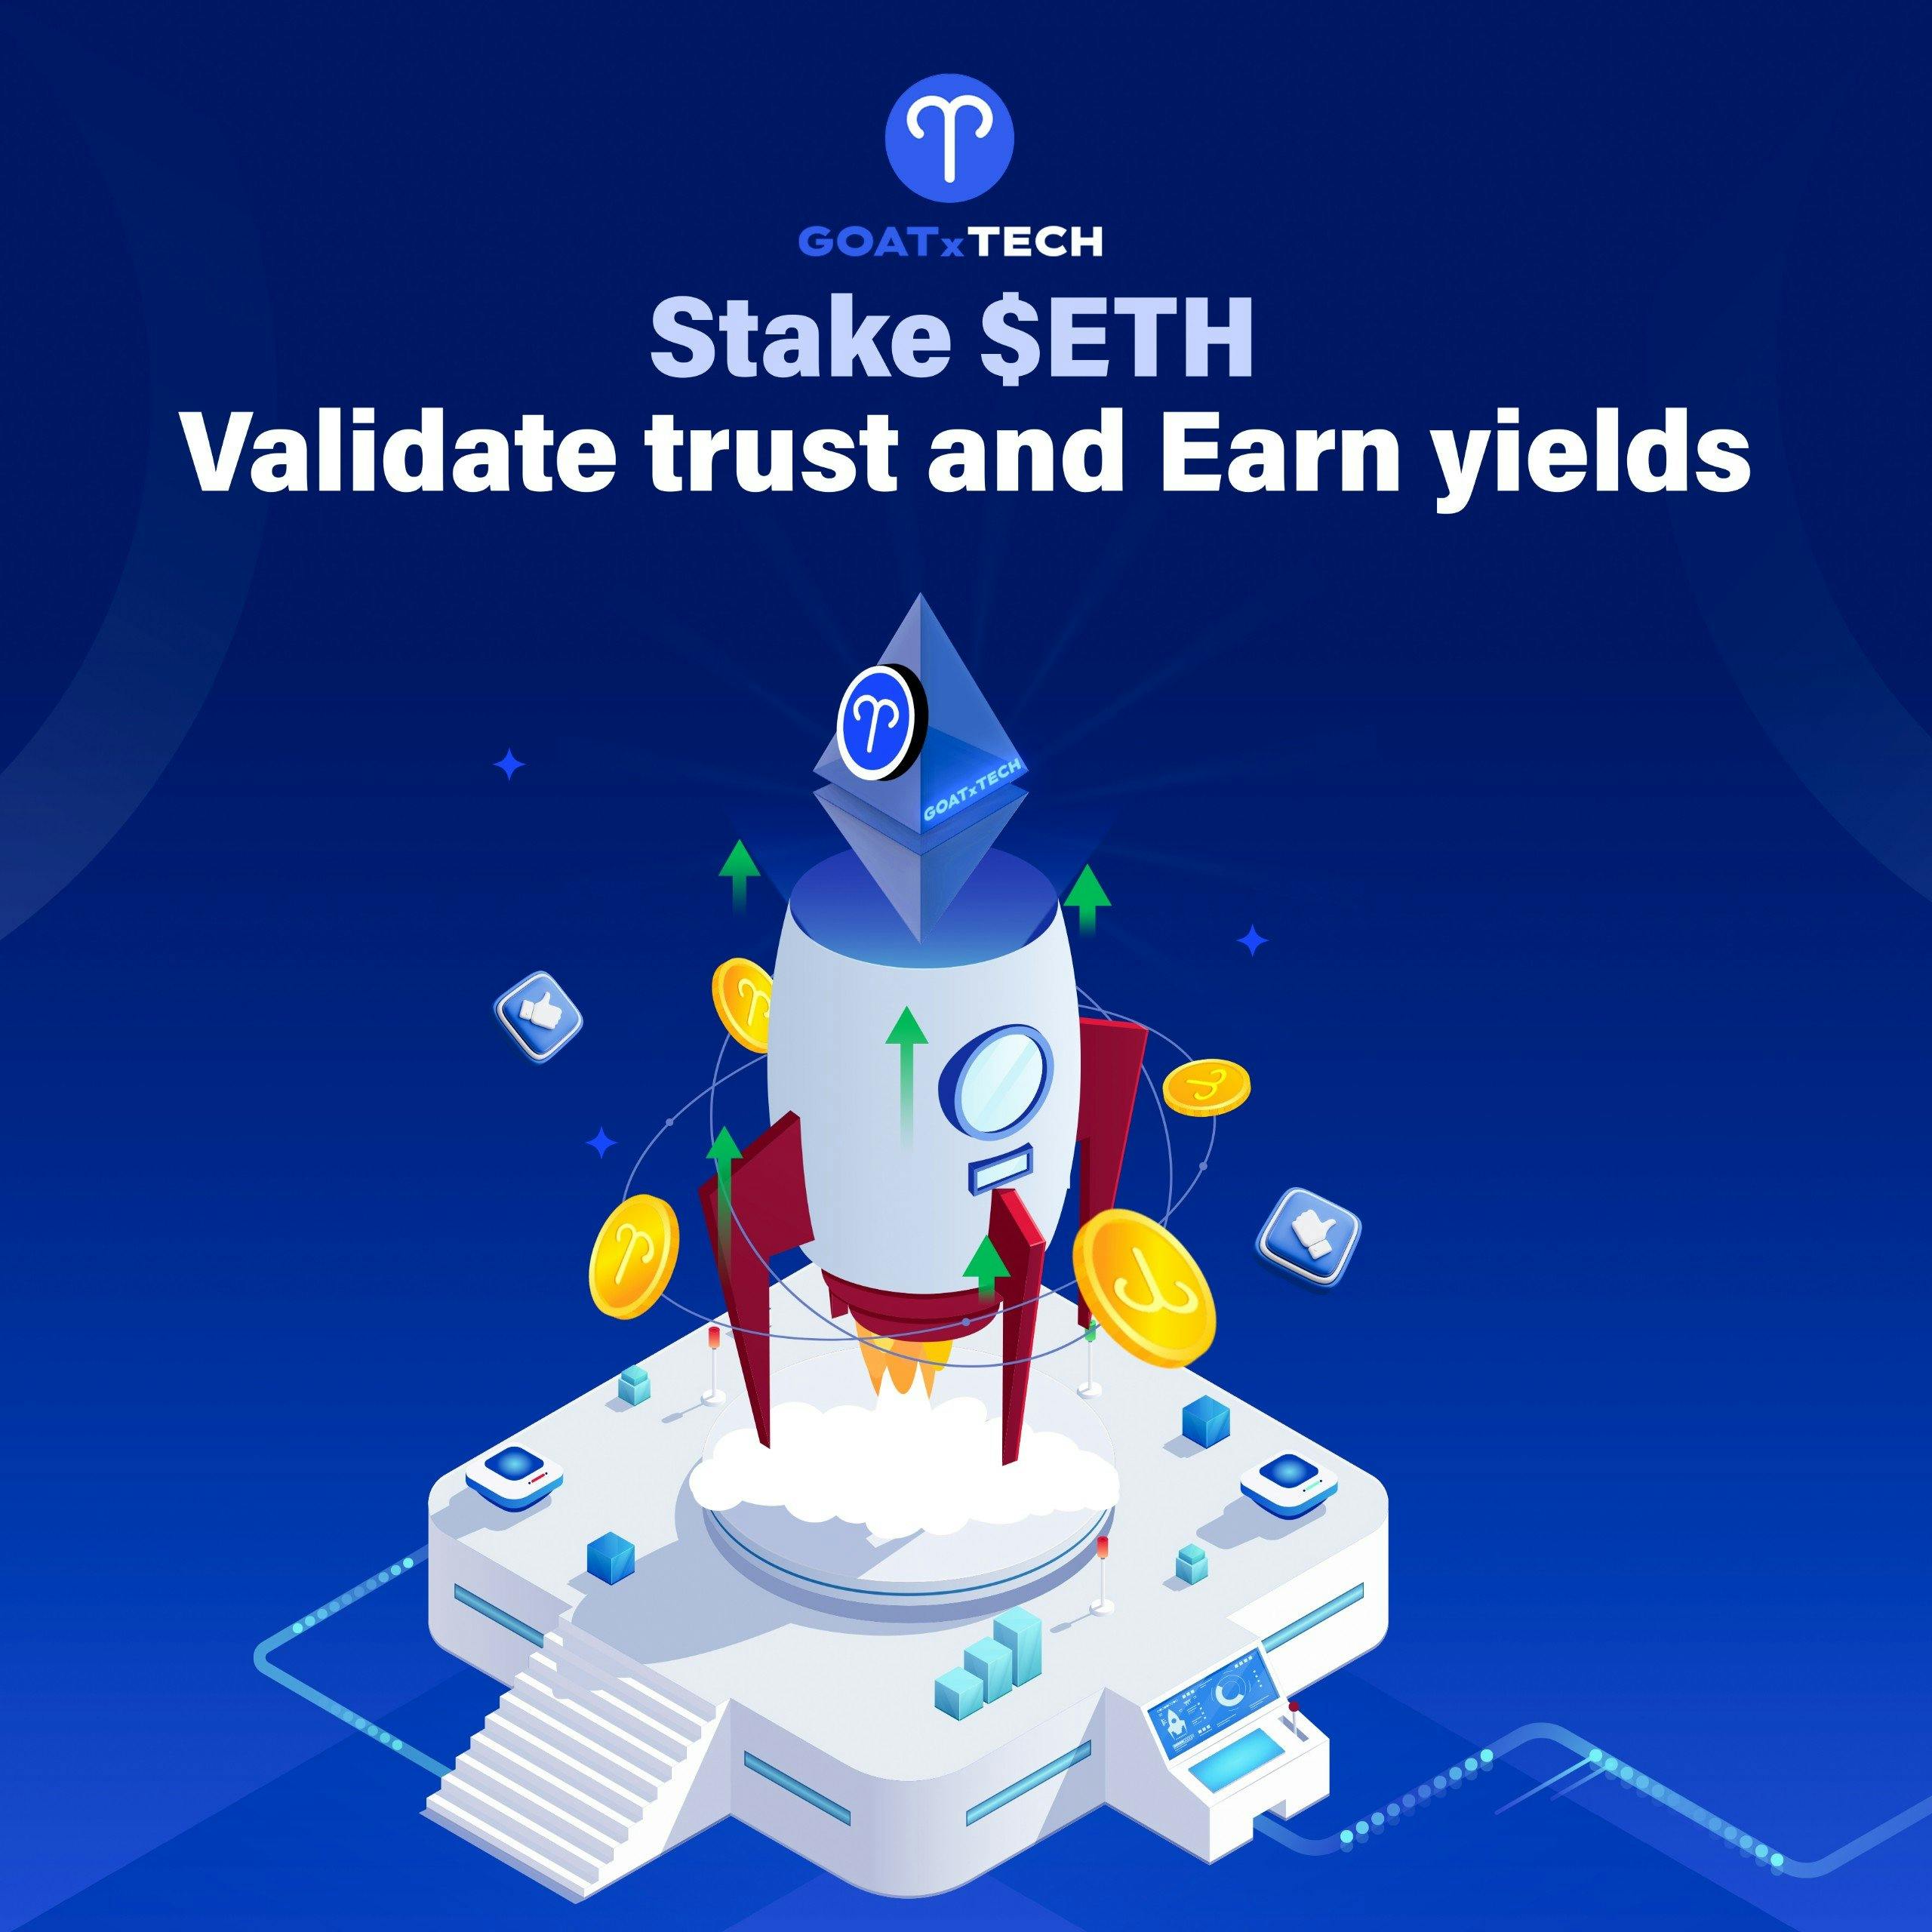 Goat.Tech - the first platform empowering Web3 users to stake $ETH for validating trust and earning $ETH yields